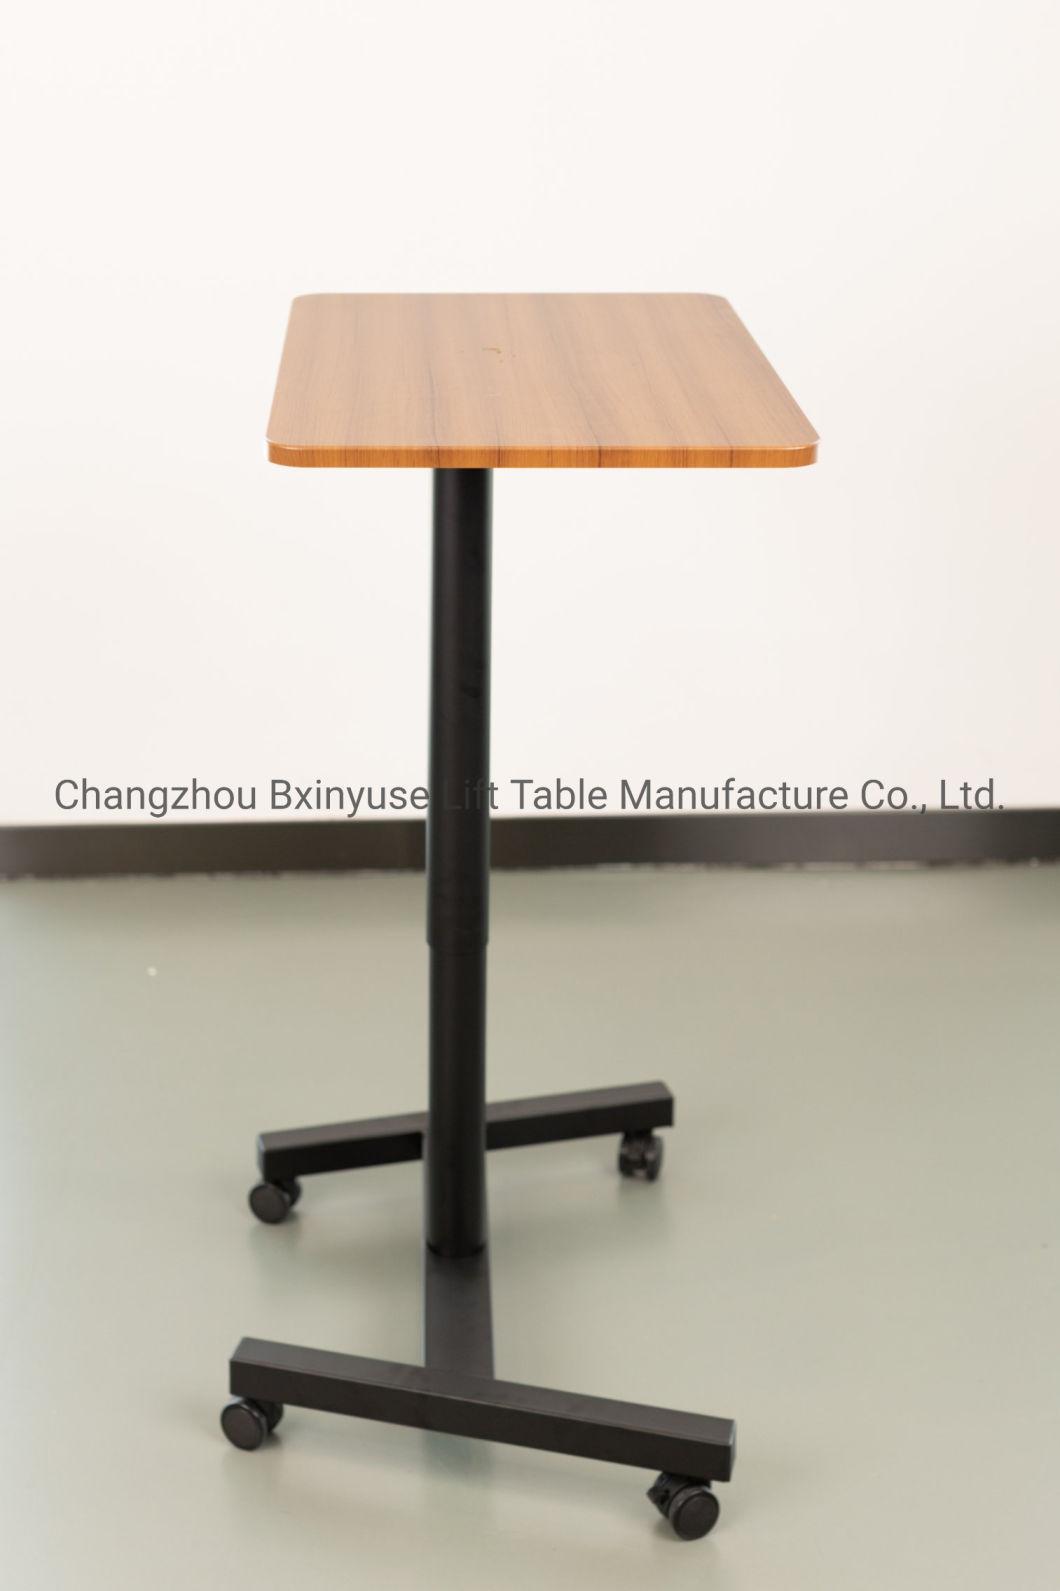 Standing Table Gas Spring Standing Table Home Table